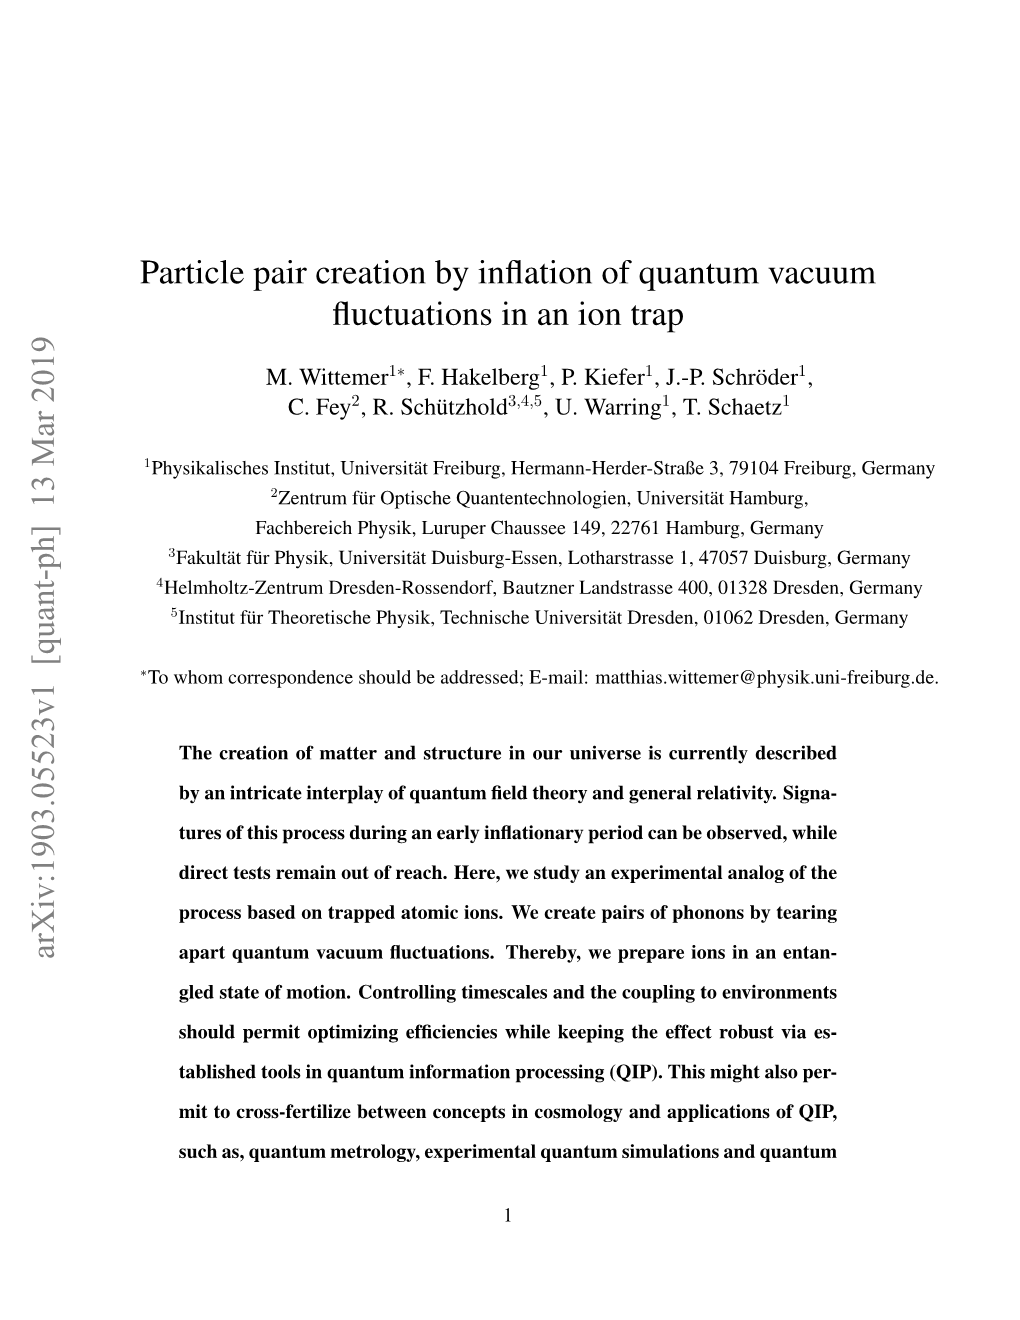 Particle Pair Creation by Inflation of Quantum Vacuum Fluctuations in an Ion Trap Arxiv:1903.05523V1 [Quant-Ph] 13 Mar 2019